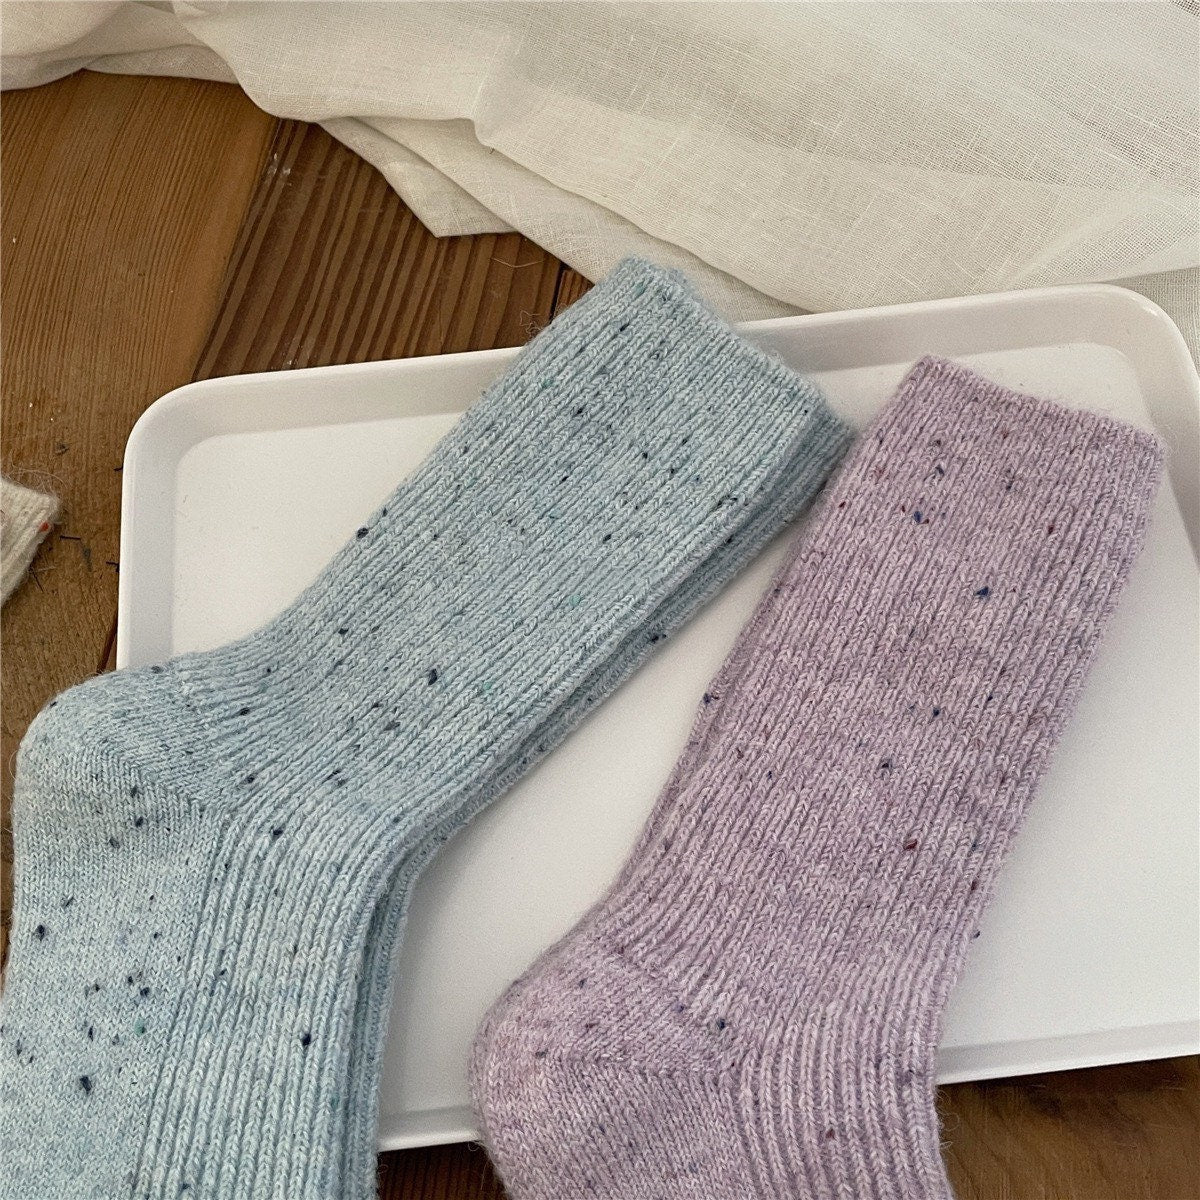 Miss June’s |  Women’s | 1 pair of socks｜Colorful | Warm | Wool | Winter | Soft |Gift Idea | Casual | Daily | Comfortable| Cozy